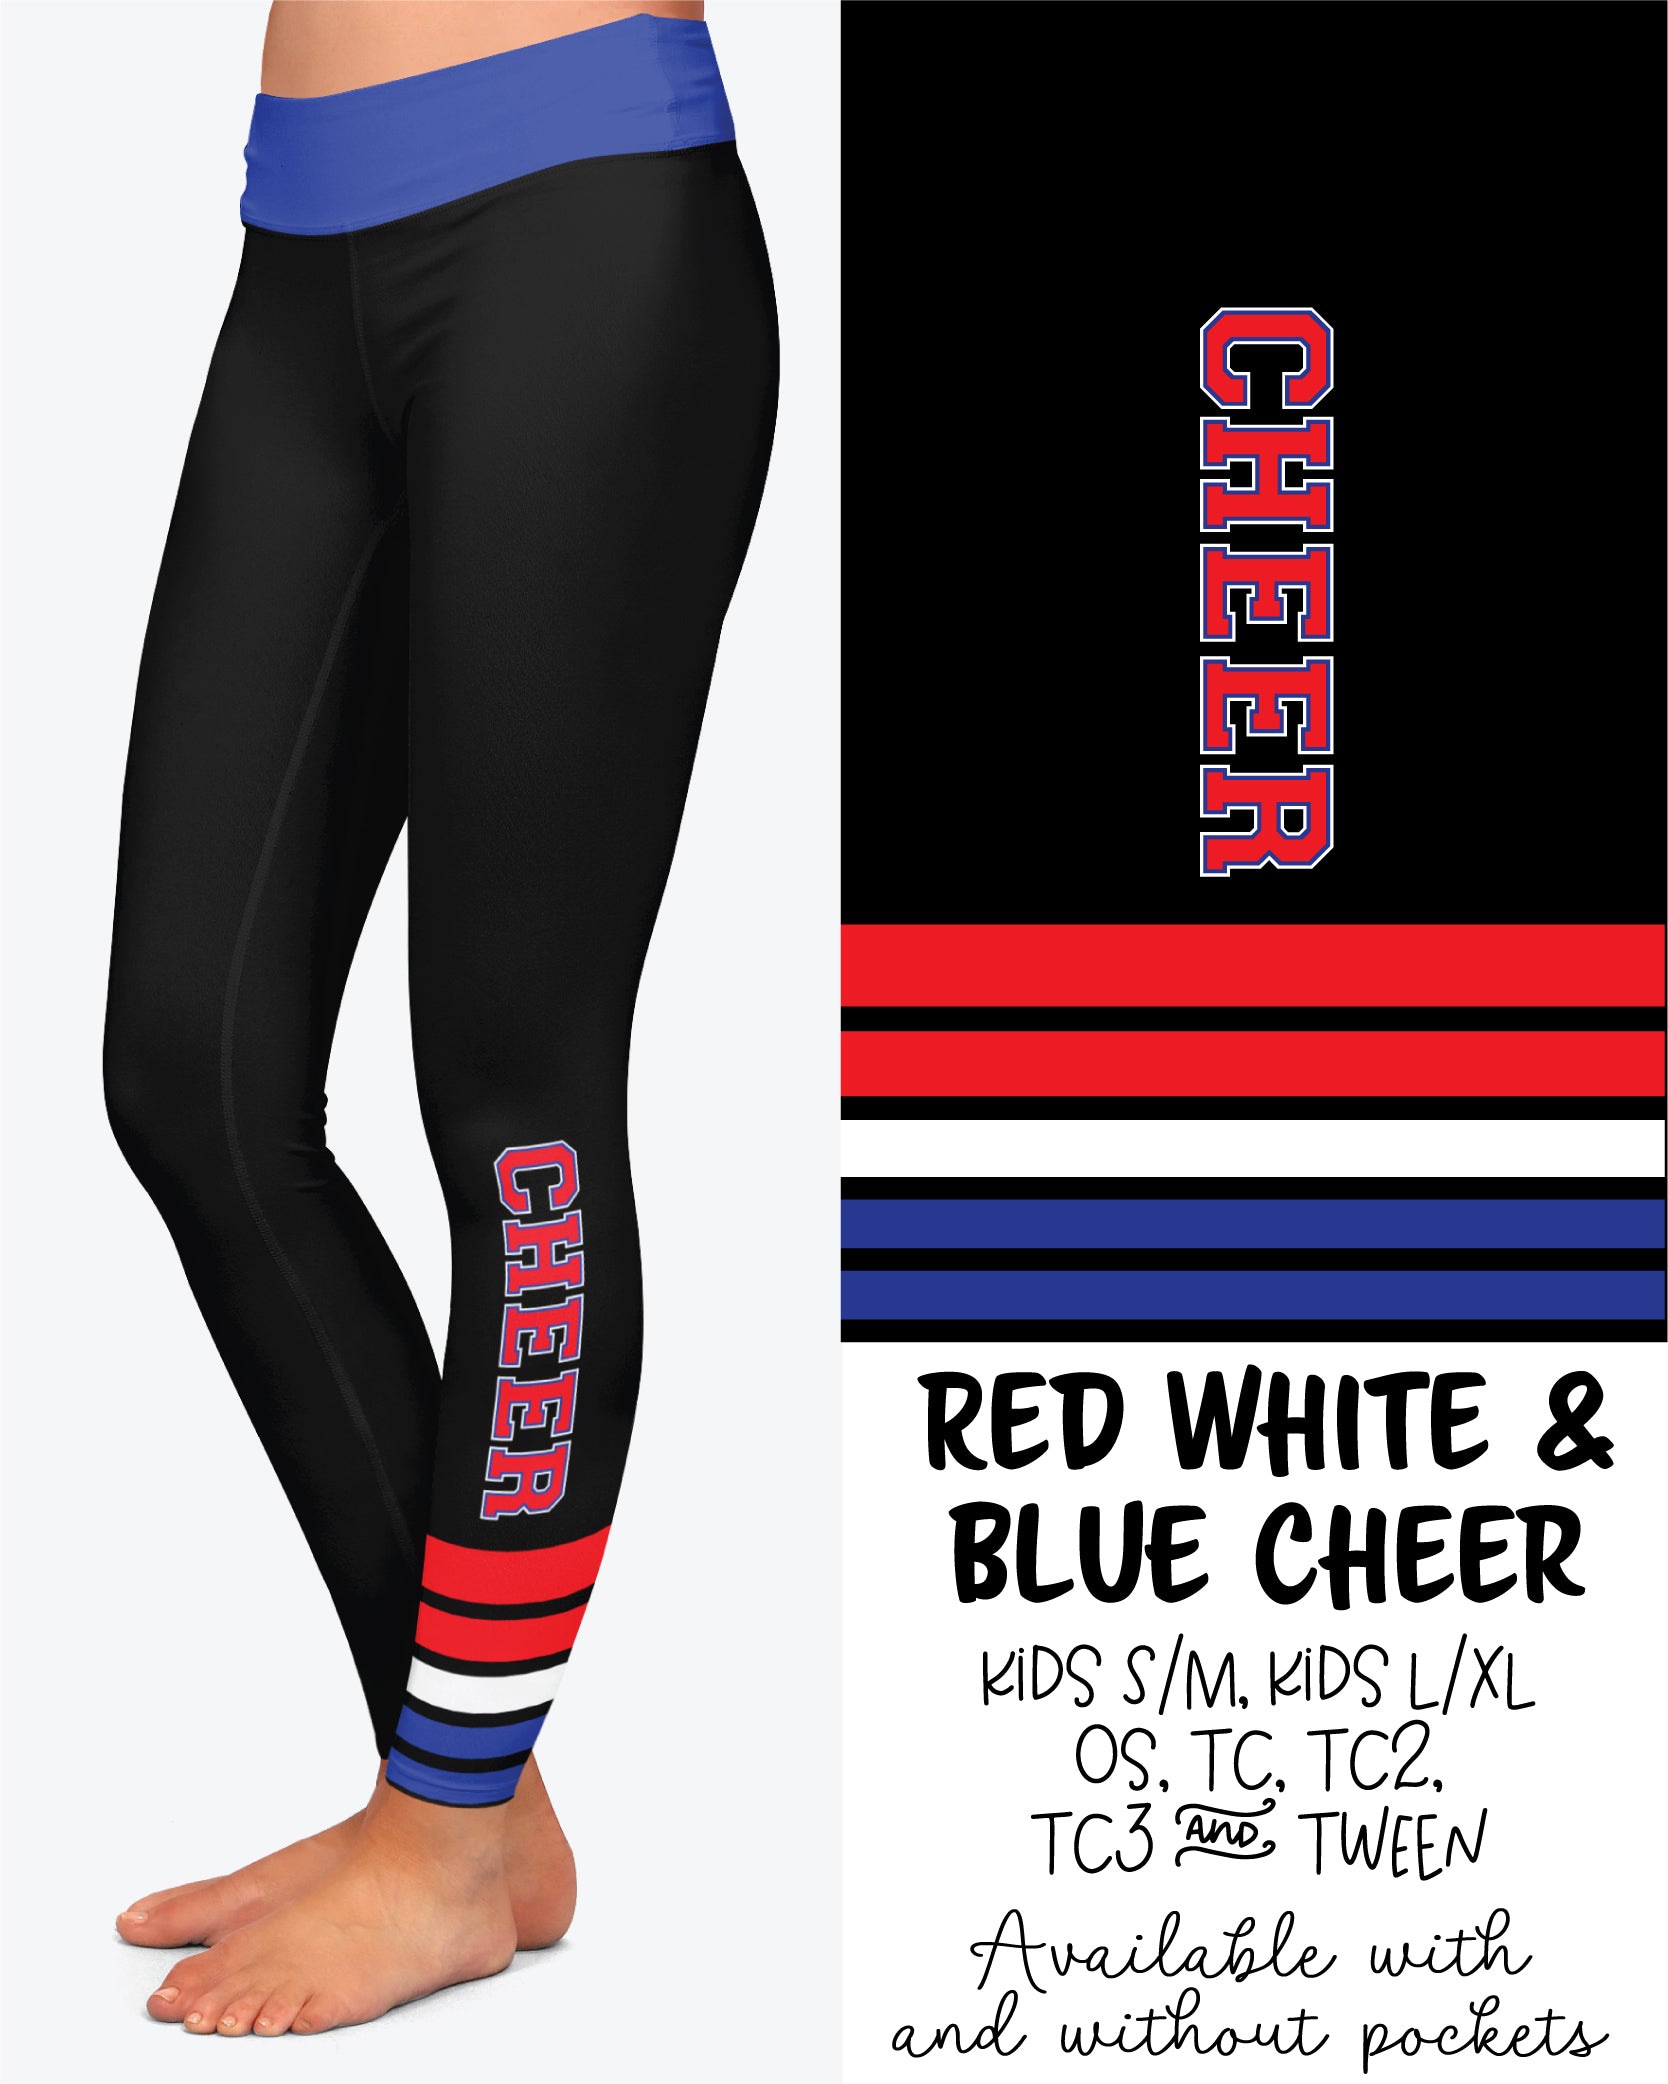 Red White & Blue Cheer Leggings Full Length With and Without Pockets Preorder 9/24